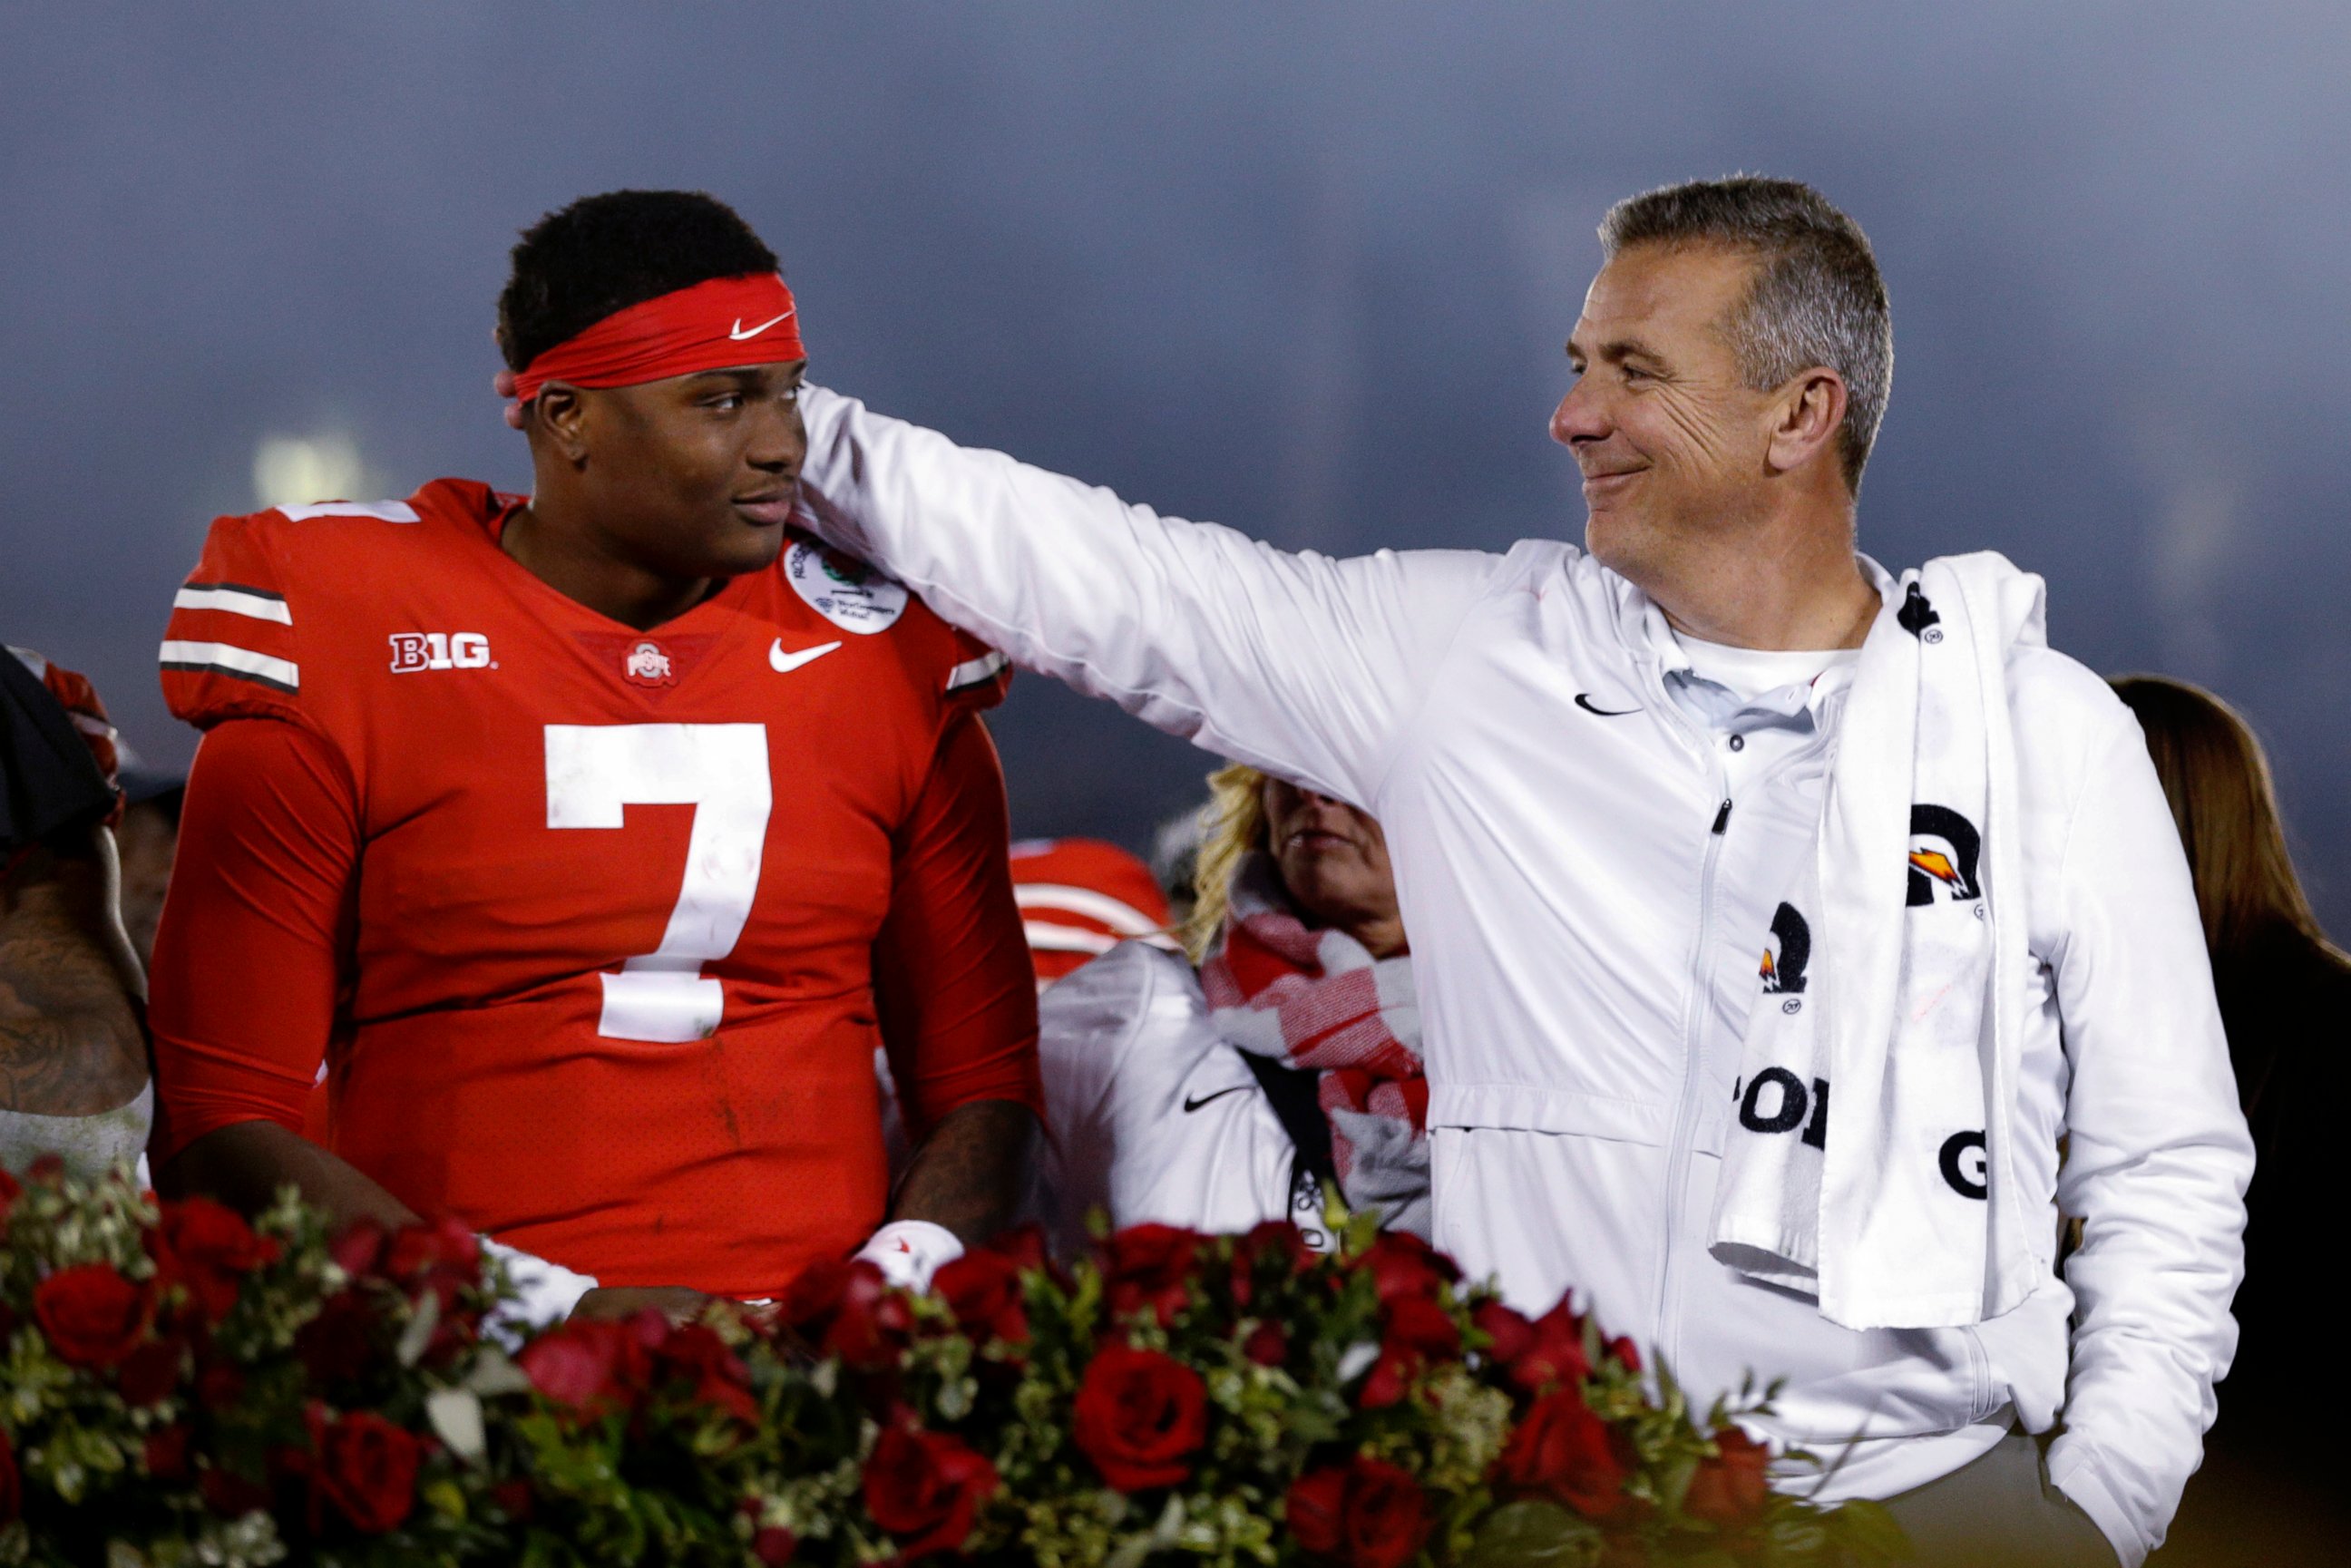 PHOTO: After his final game as a head coach, Ohio State's Urban Meyer, right, celebrates with quarterback Dwayne Haskins after Ohio State defeated Washington 28-23 in the Rose Bowl NCAA college football game Tuesday, Jan. 1, 2019, in Pasadena, Calif.